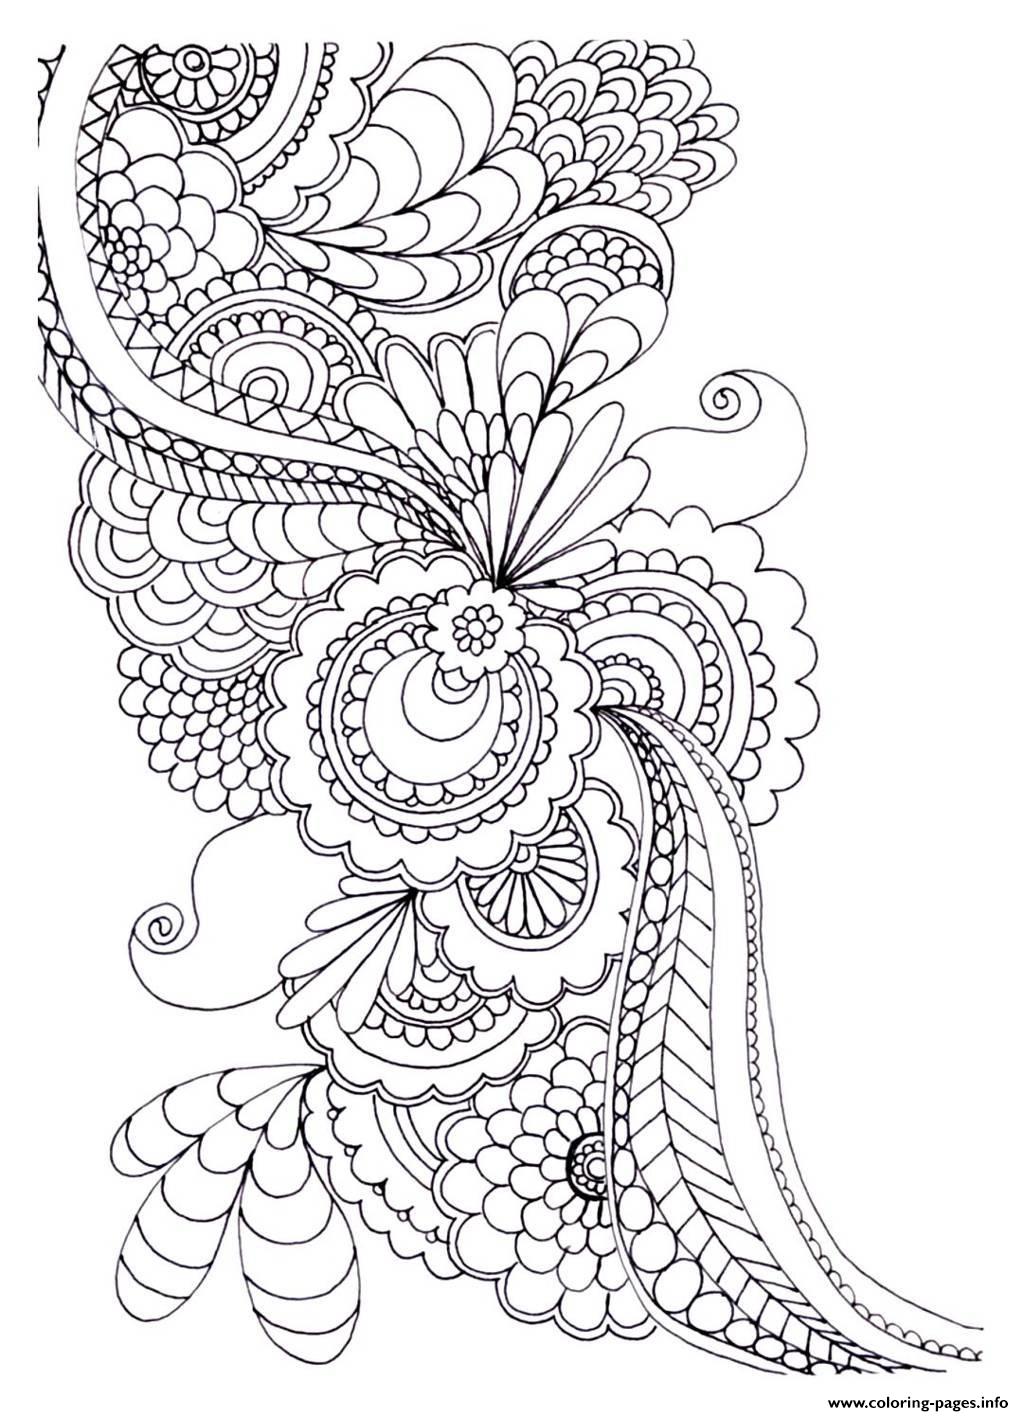 Adult Zen Anti Stress To Print Drawing Flowers Coloring Pages Printable